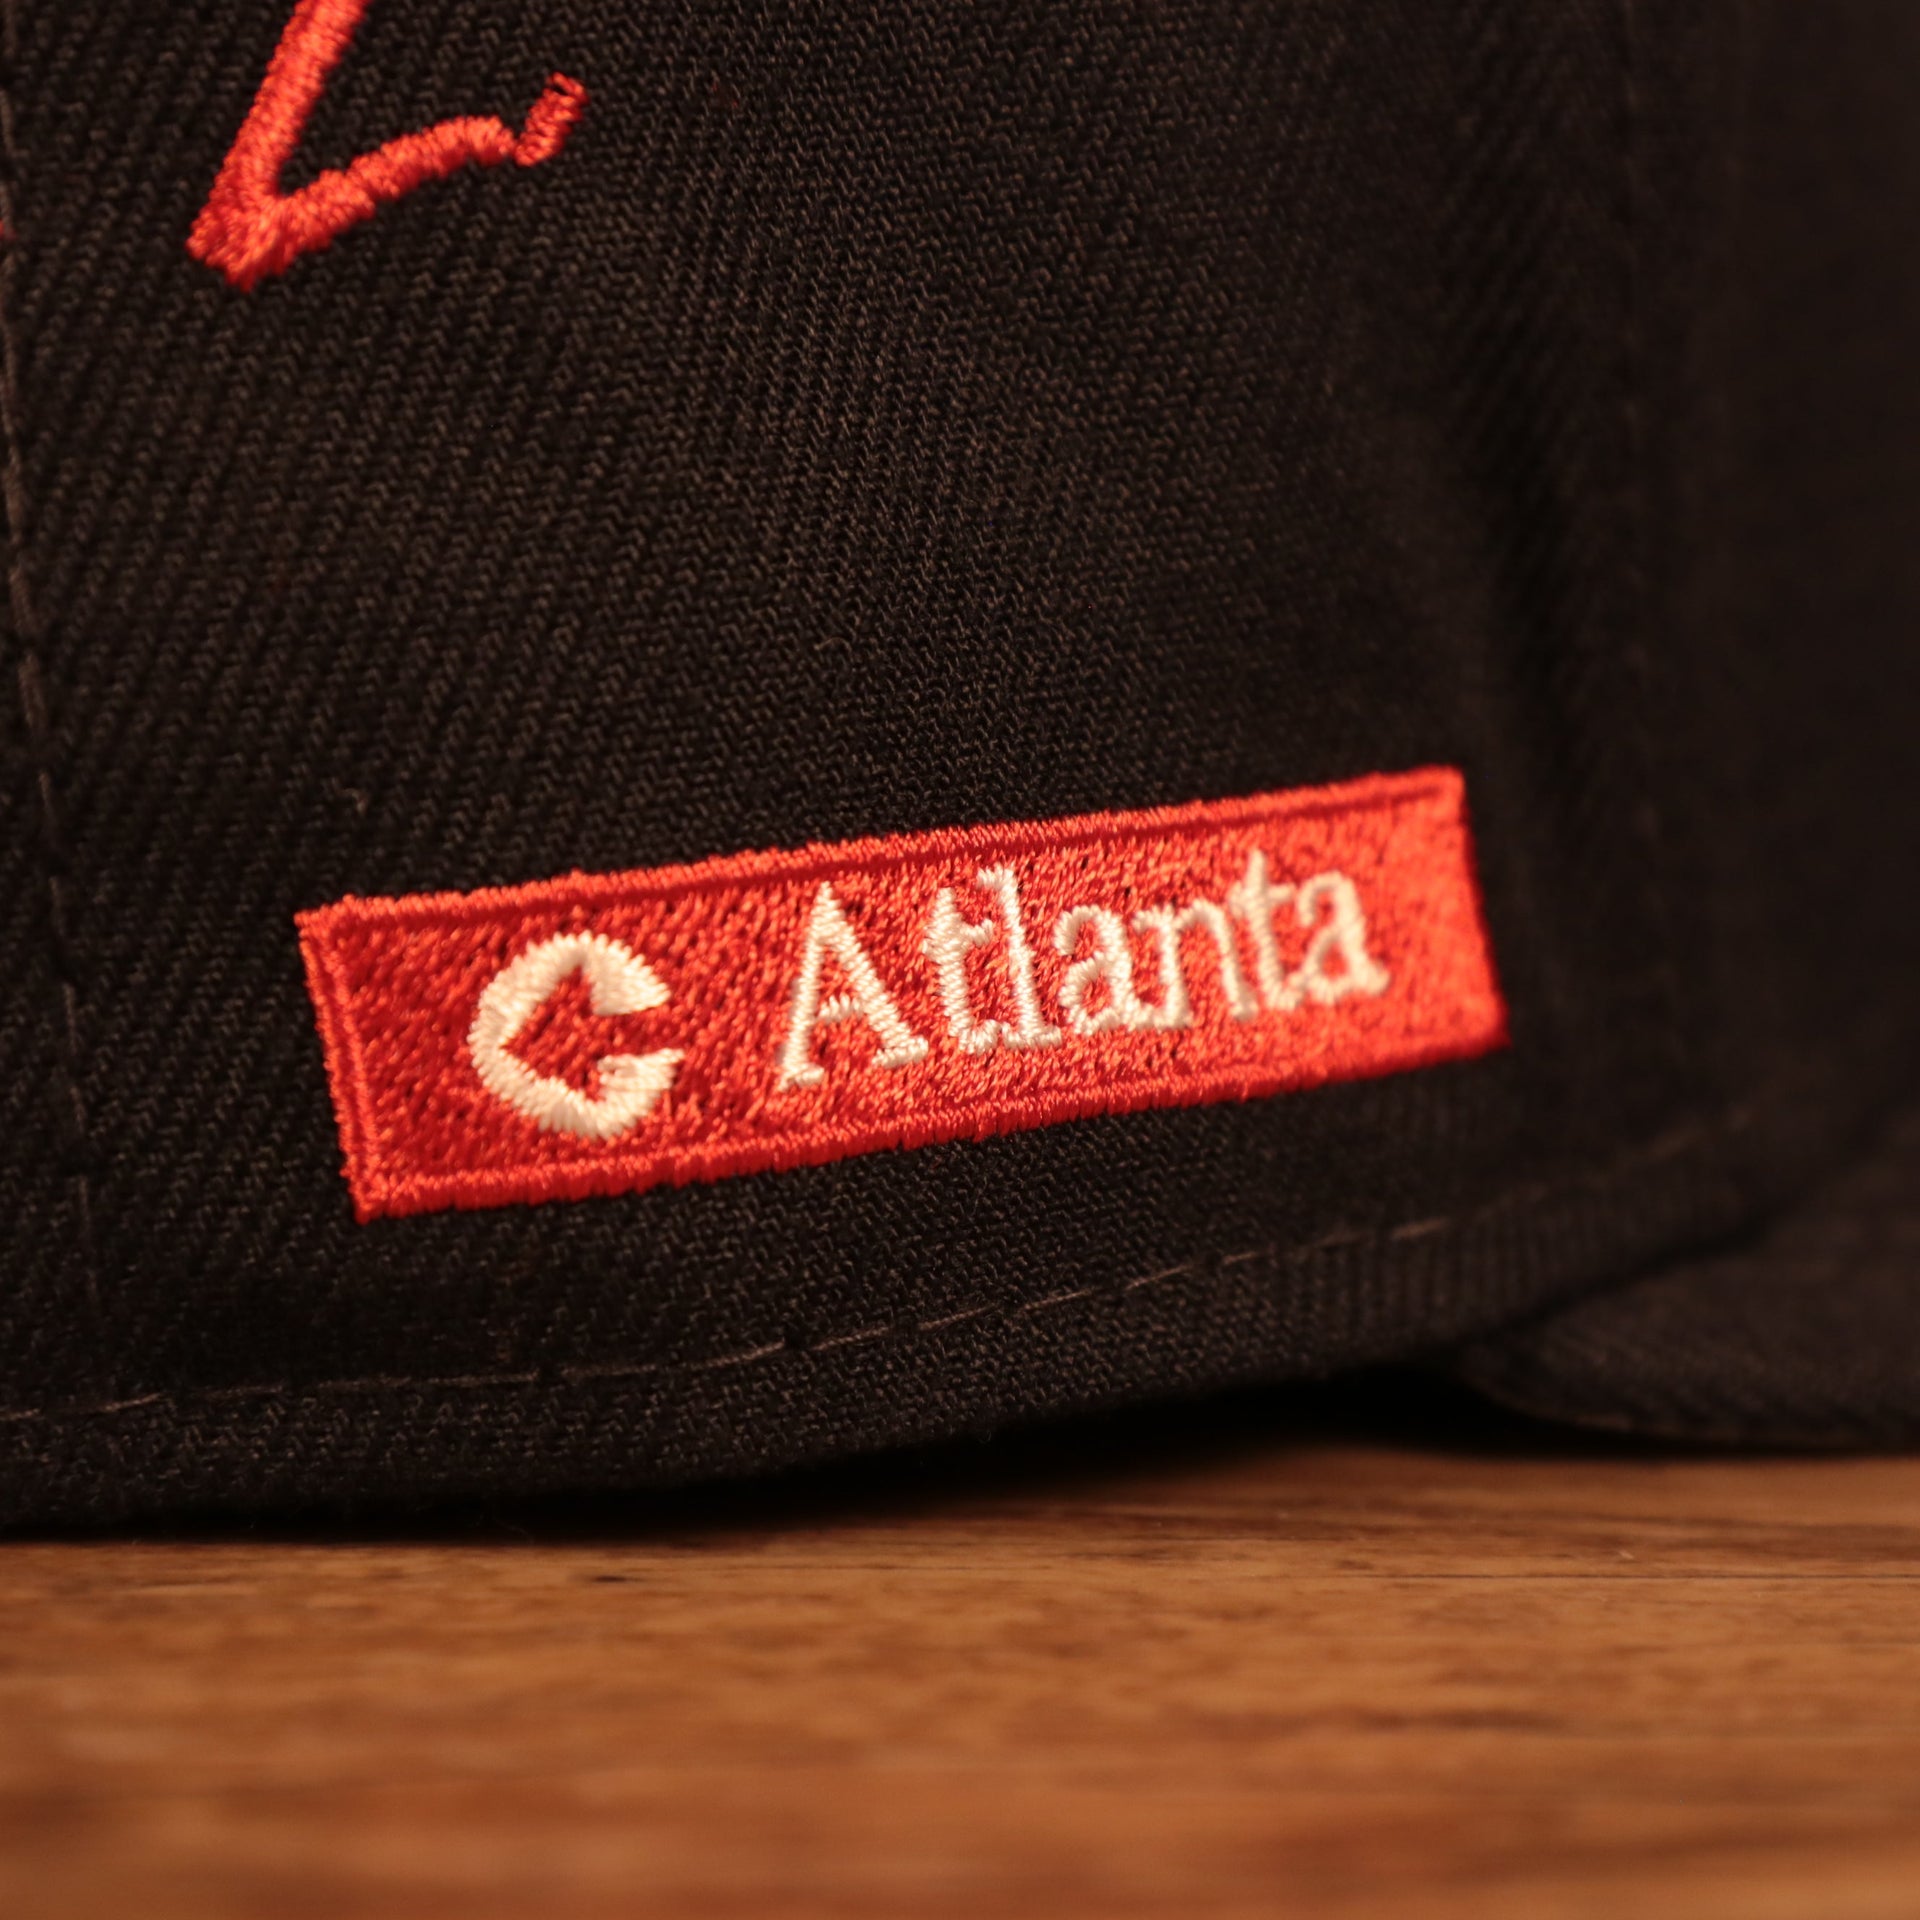 Close up of the Atlanta street sign on the Atlanta Braves City Transit All Over Side Patch Gray Bottom 59Fifty Fitted Cap